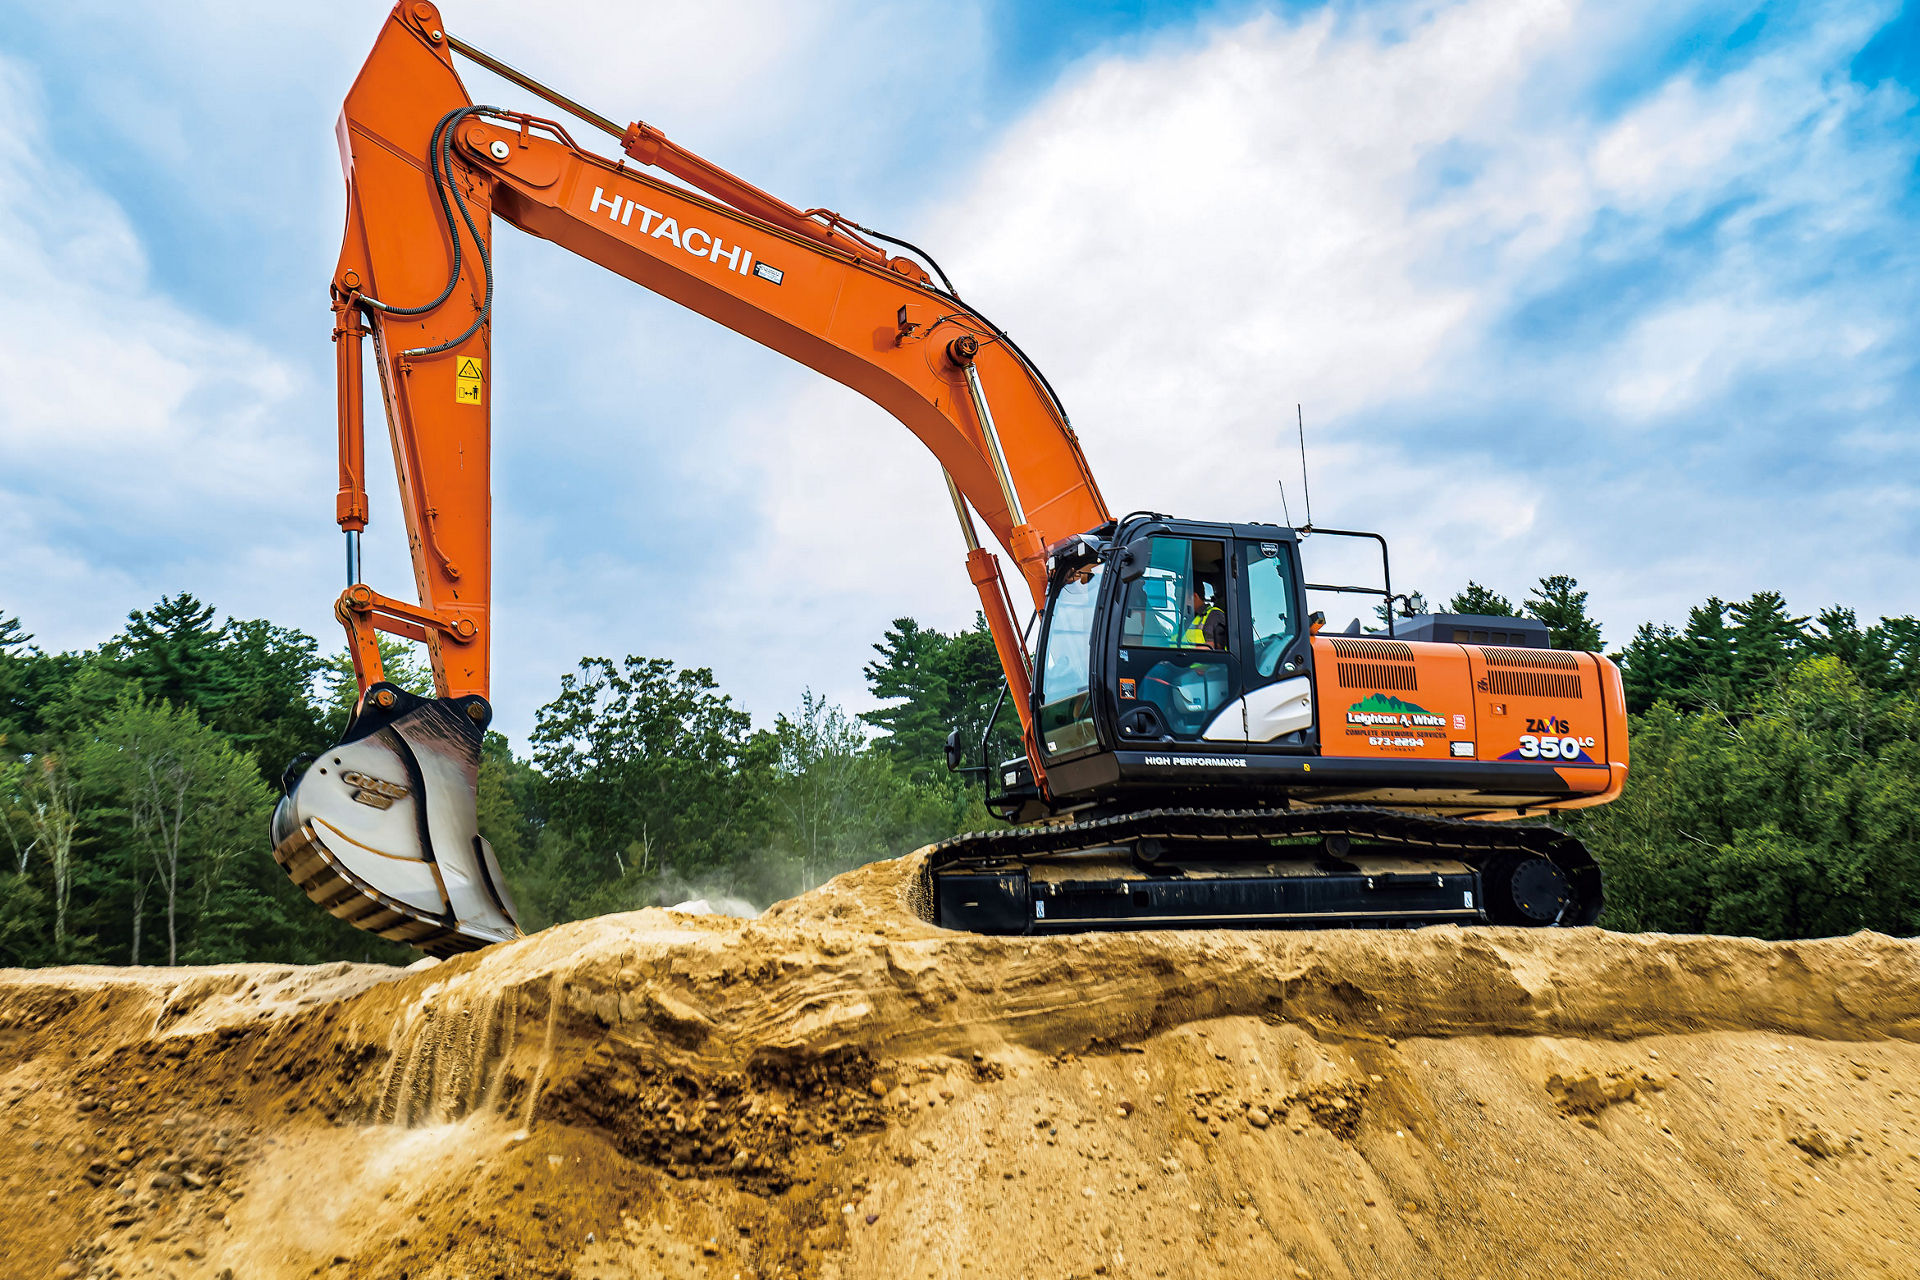 Large hydraulic excavator “ZX350” in action on construction site.